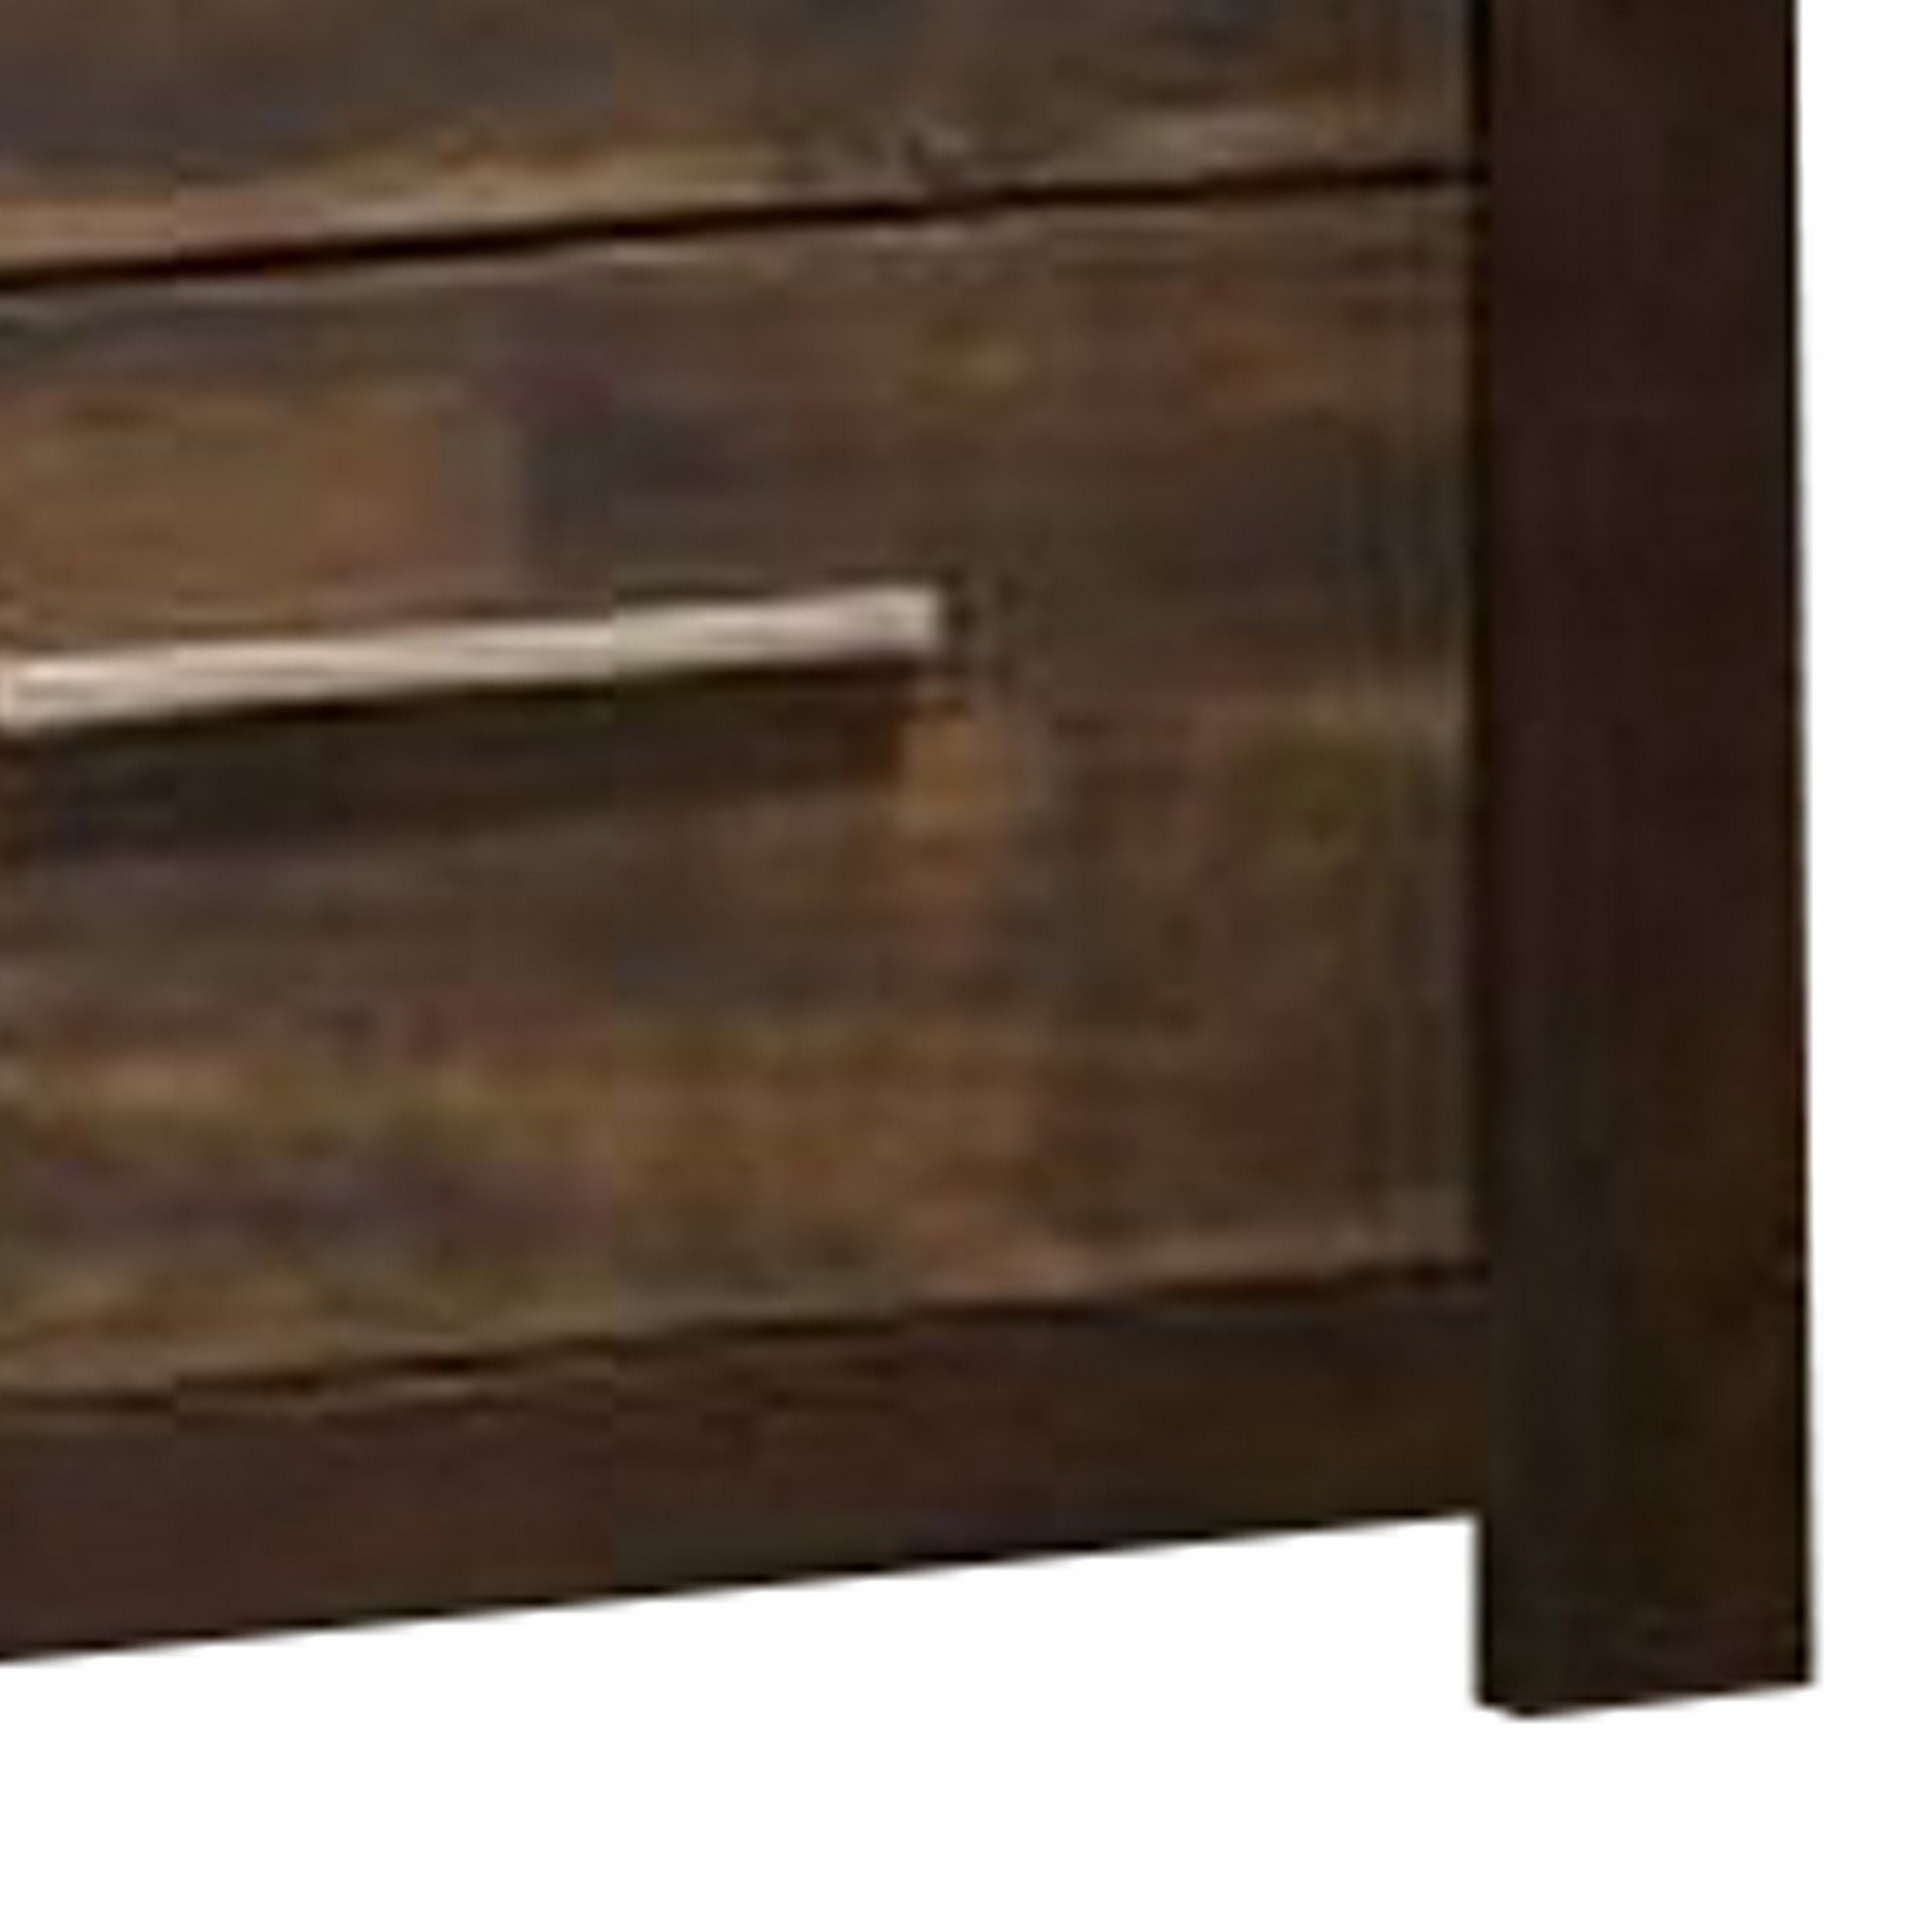 Wooden Nightstand With Two Drawers And Metal Bar Handles, Brown- Saltoro Sherpi